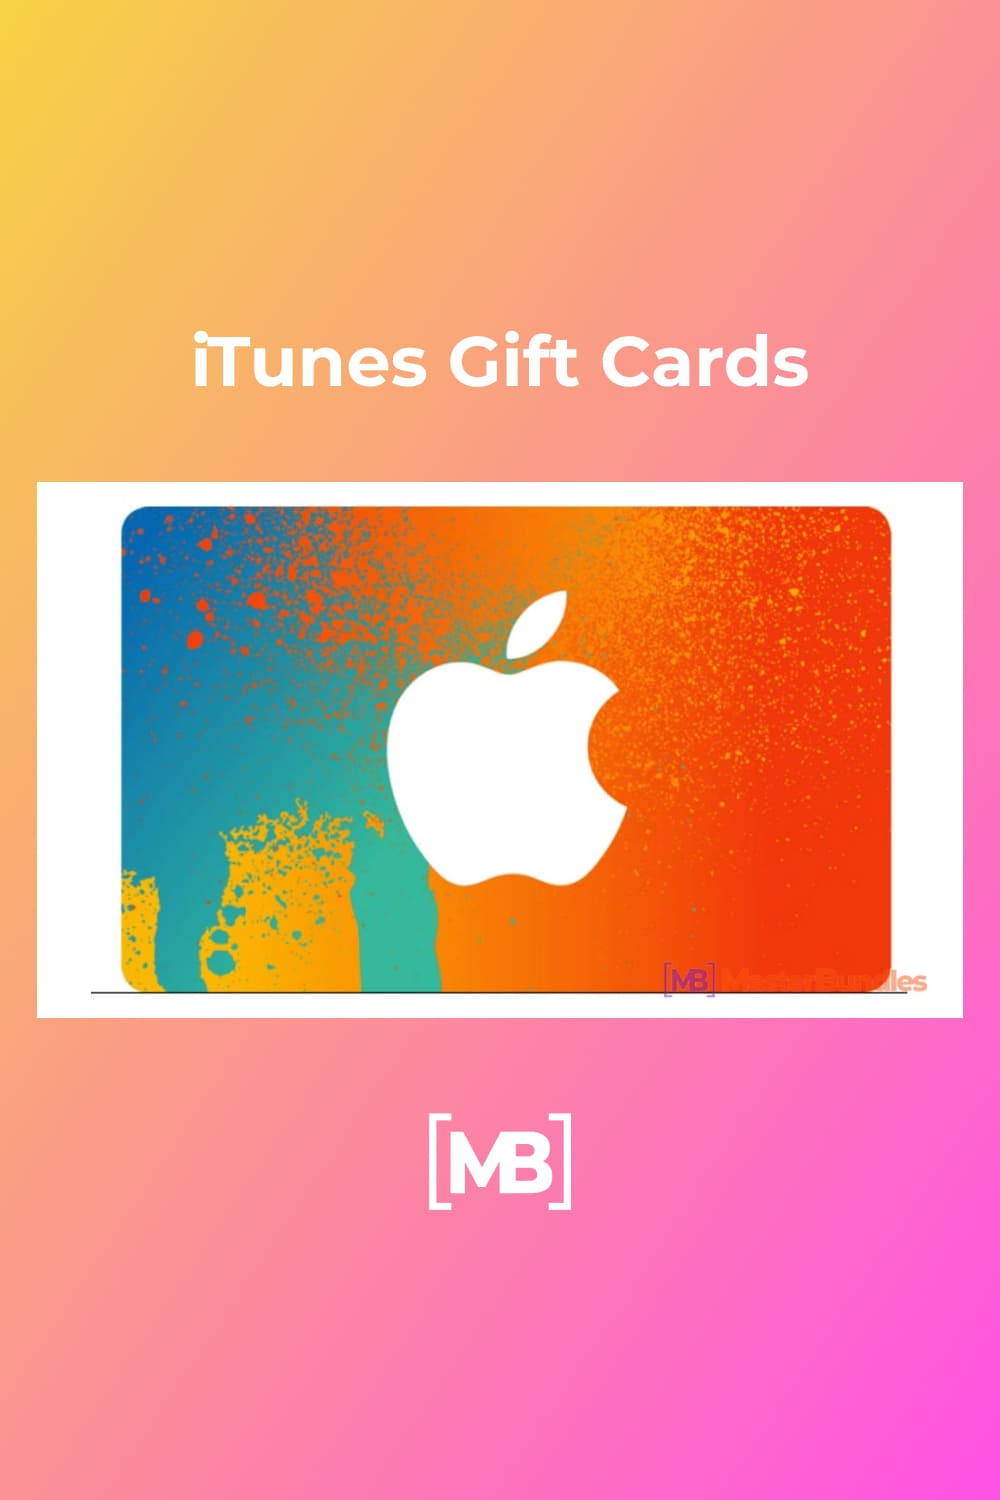 iTunes Gift Cards.